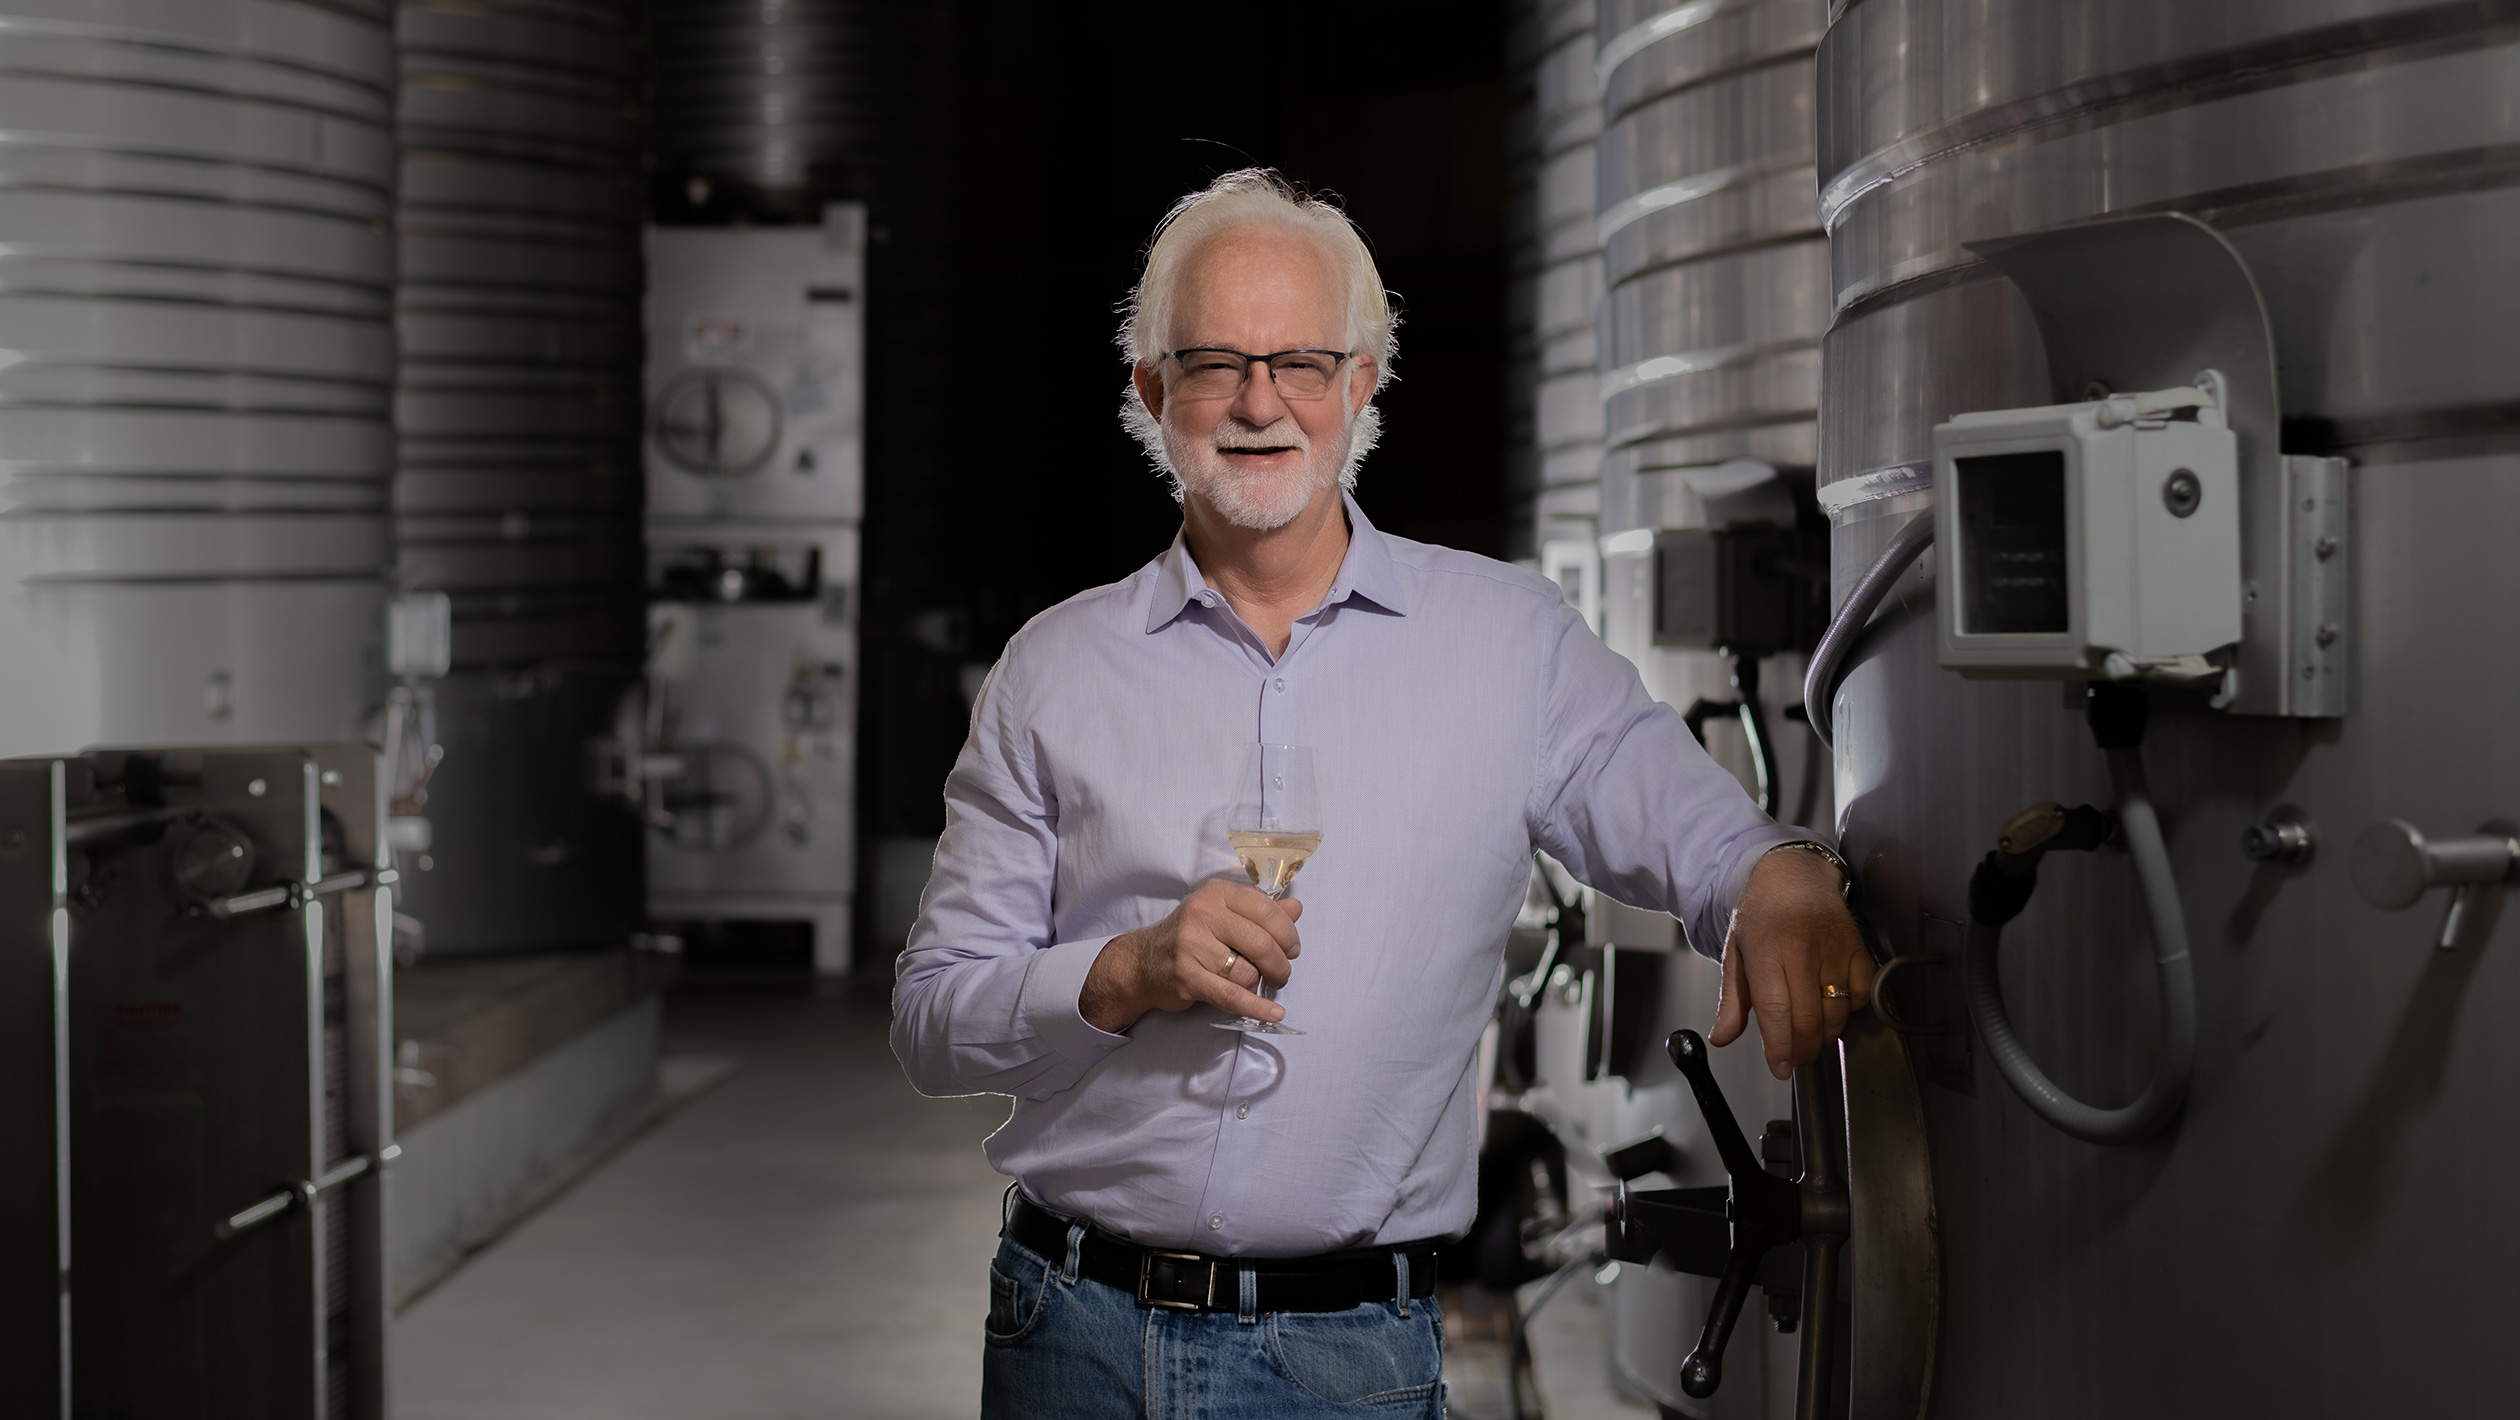 Harry Hansen poses in a winemaking facility